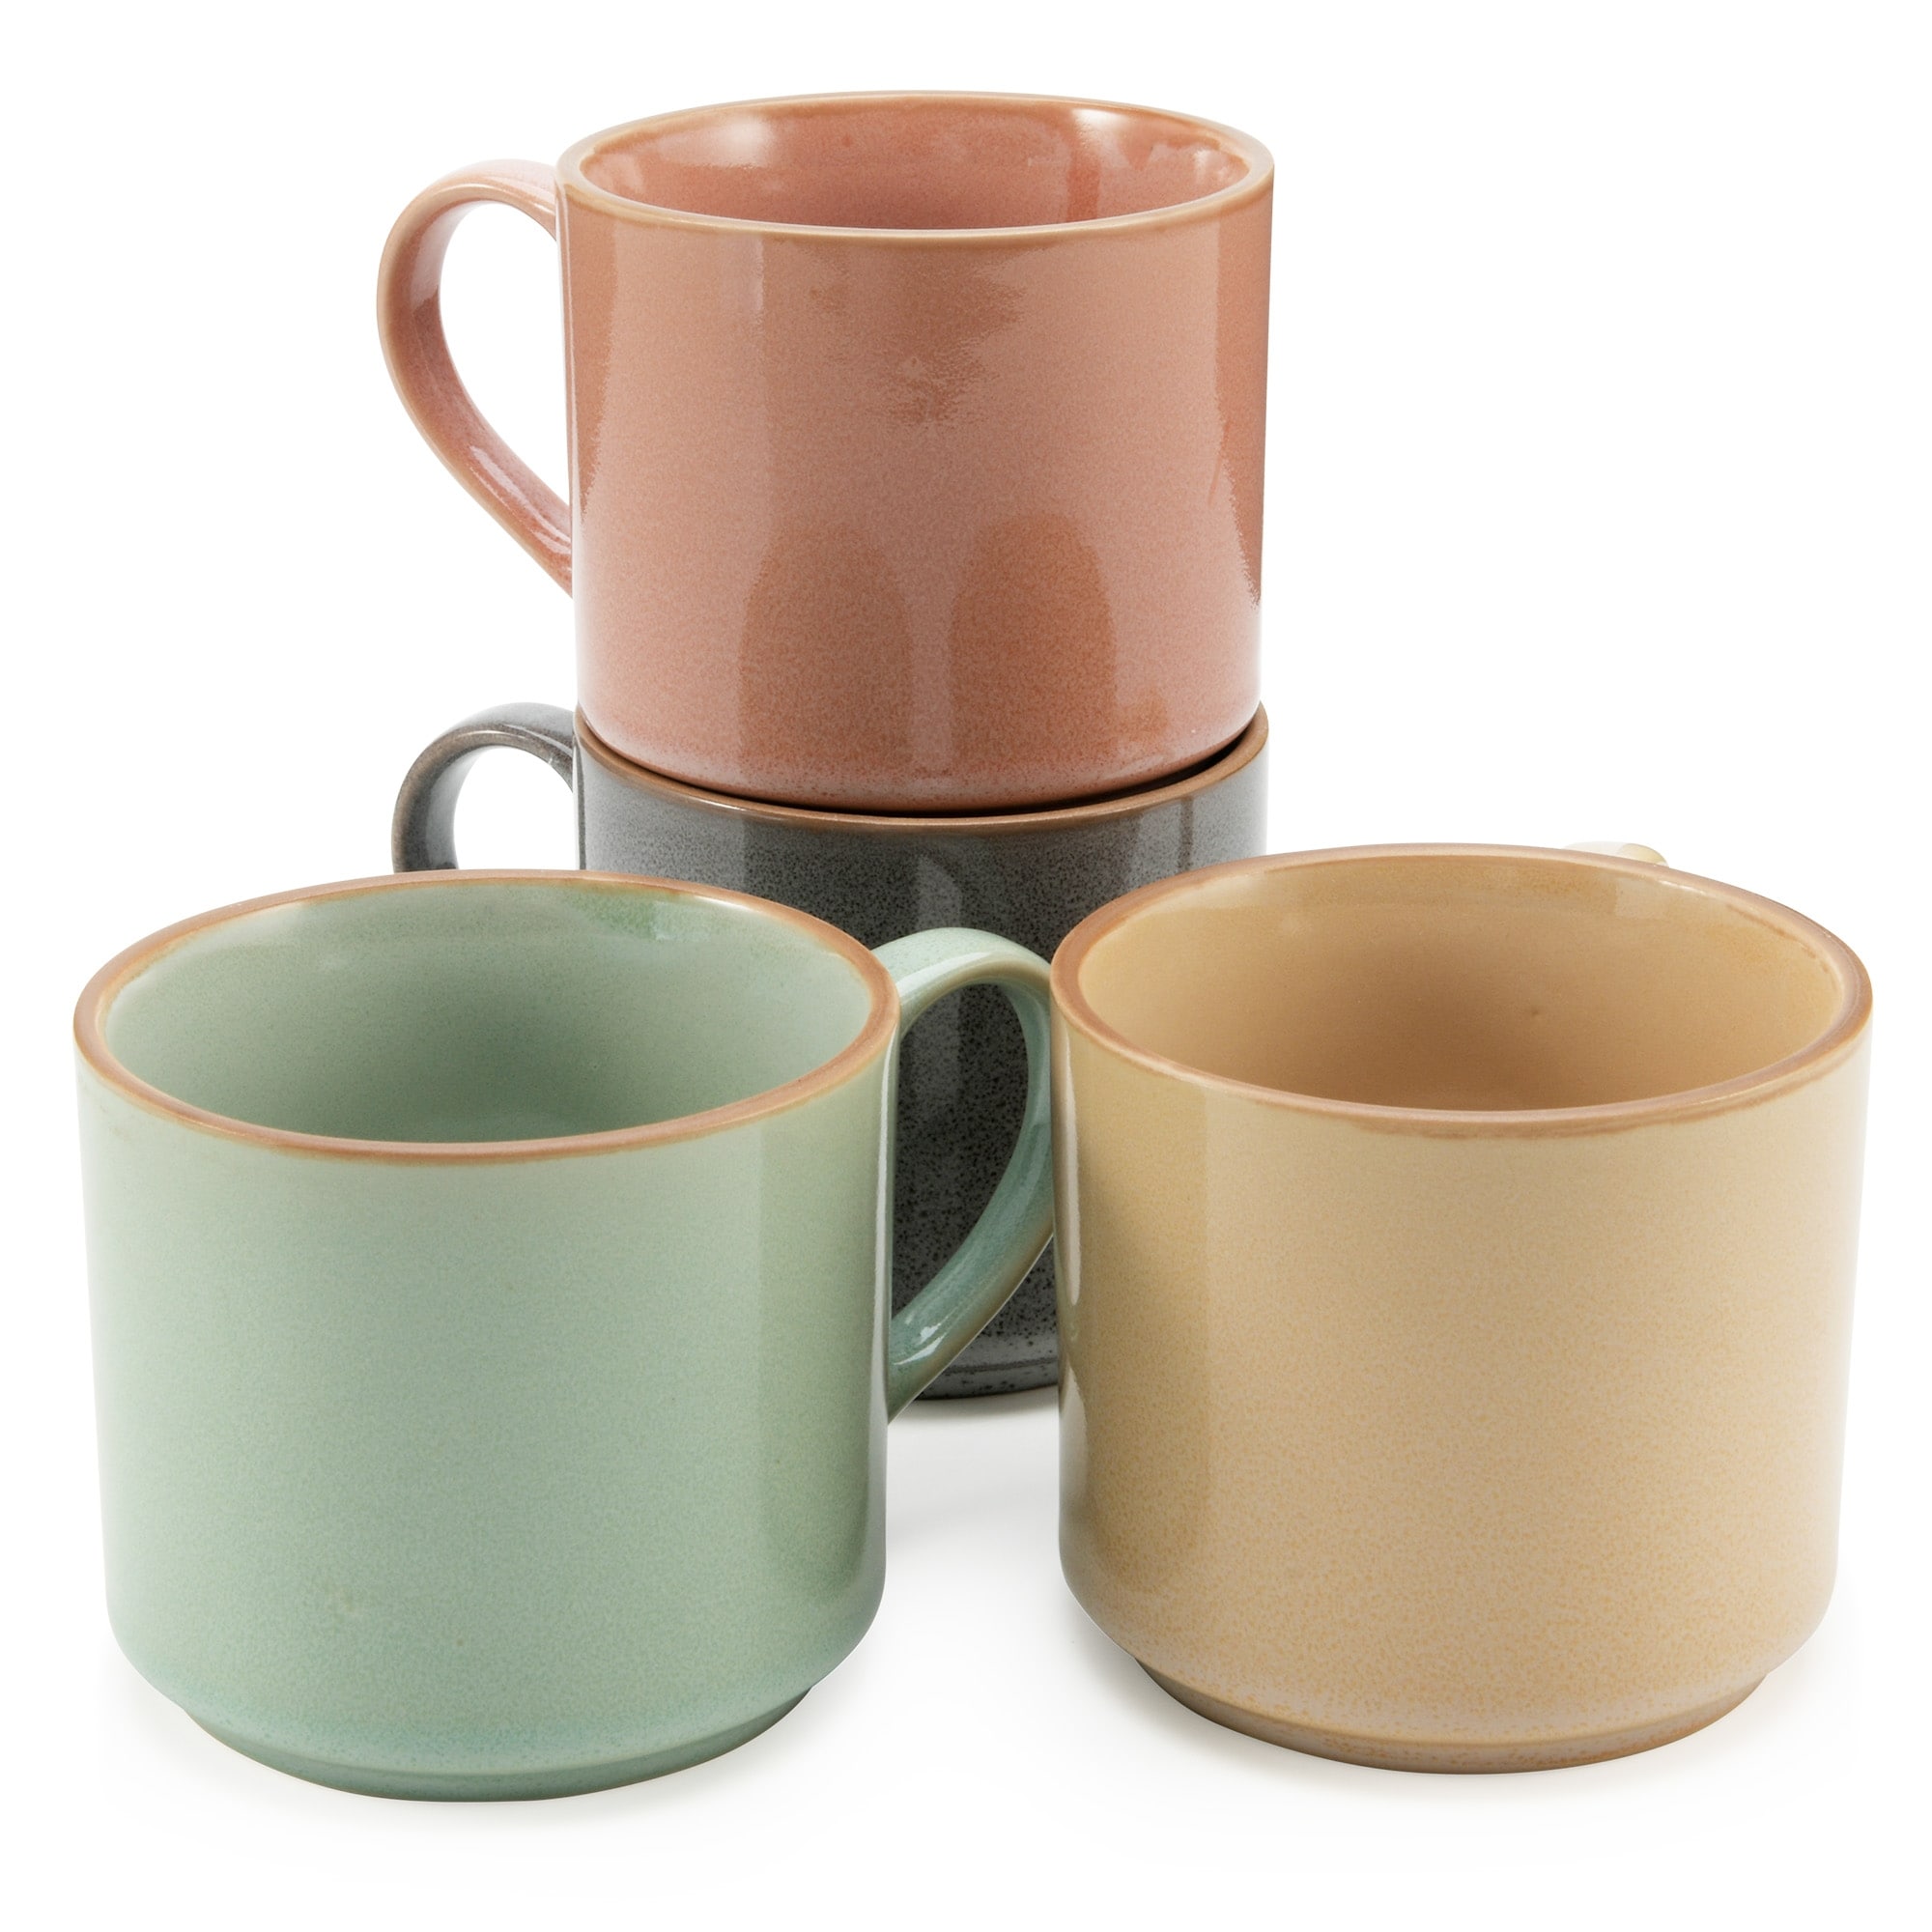 American Atelier Stackable Stoneware 16 Oz. Coffee Mugs Set, Cups